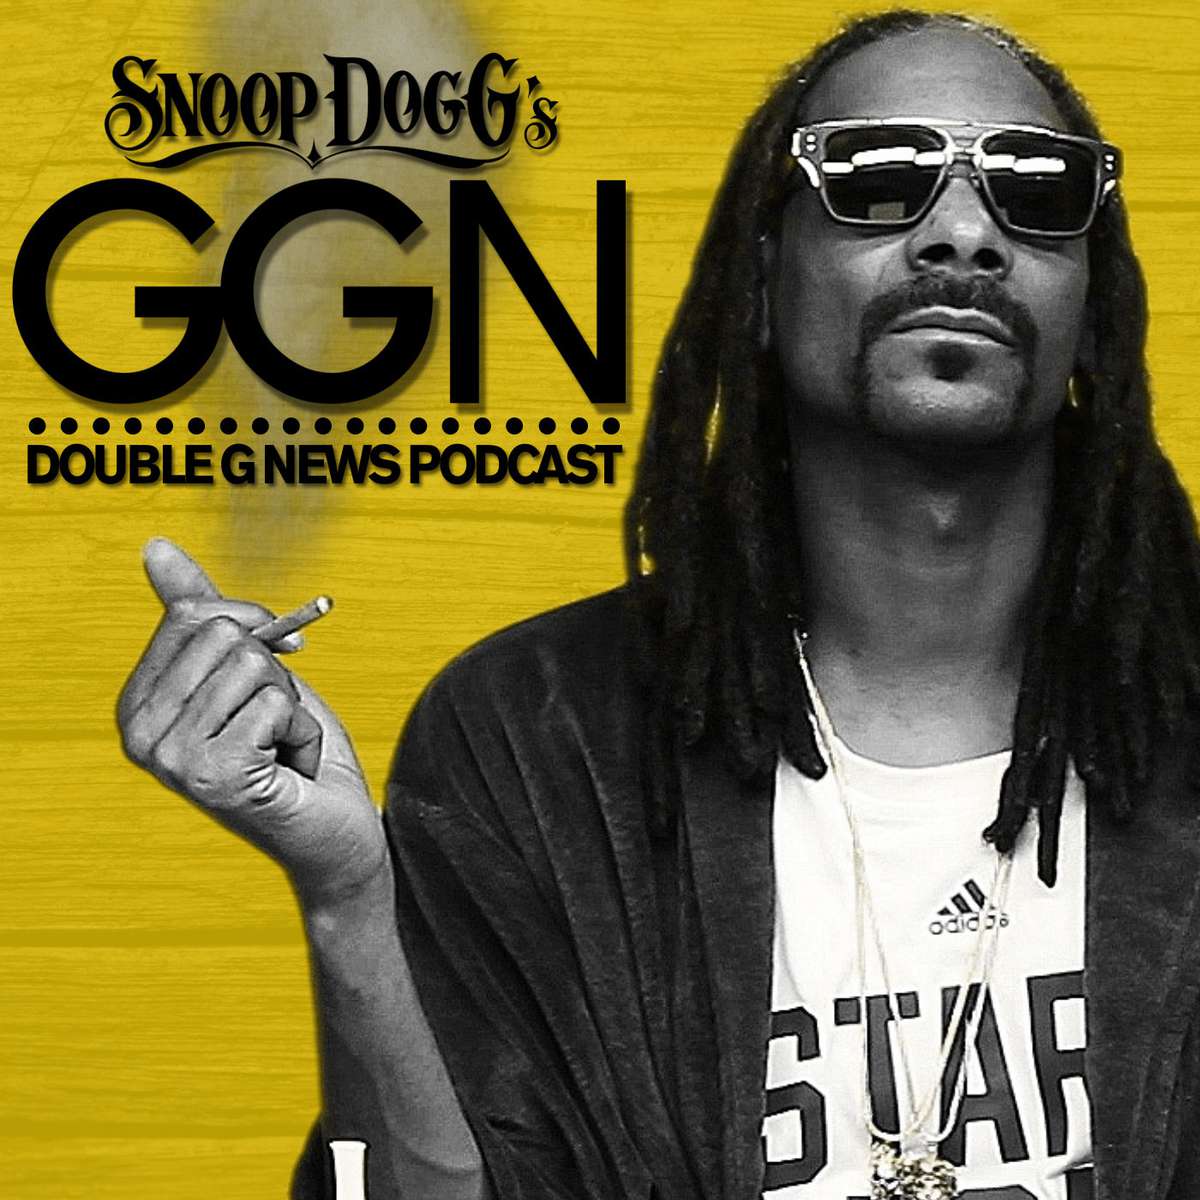 Snoop Dogg: Snoop Dogg’s GGN Podcast